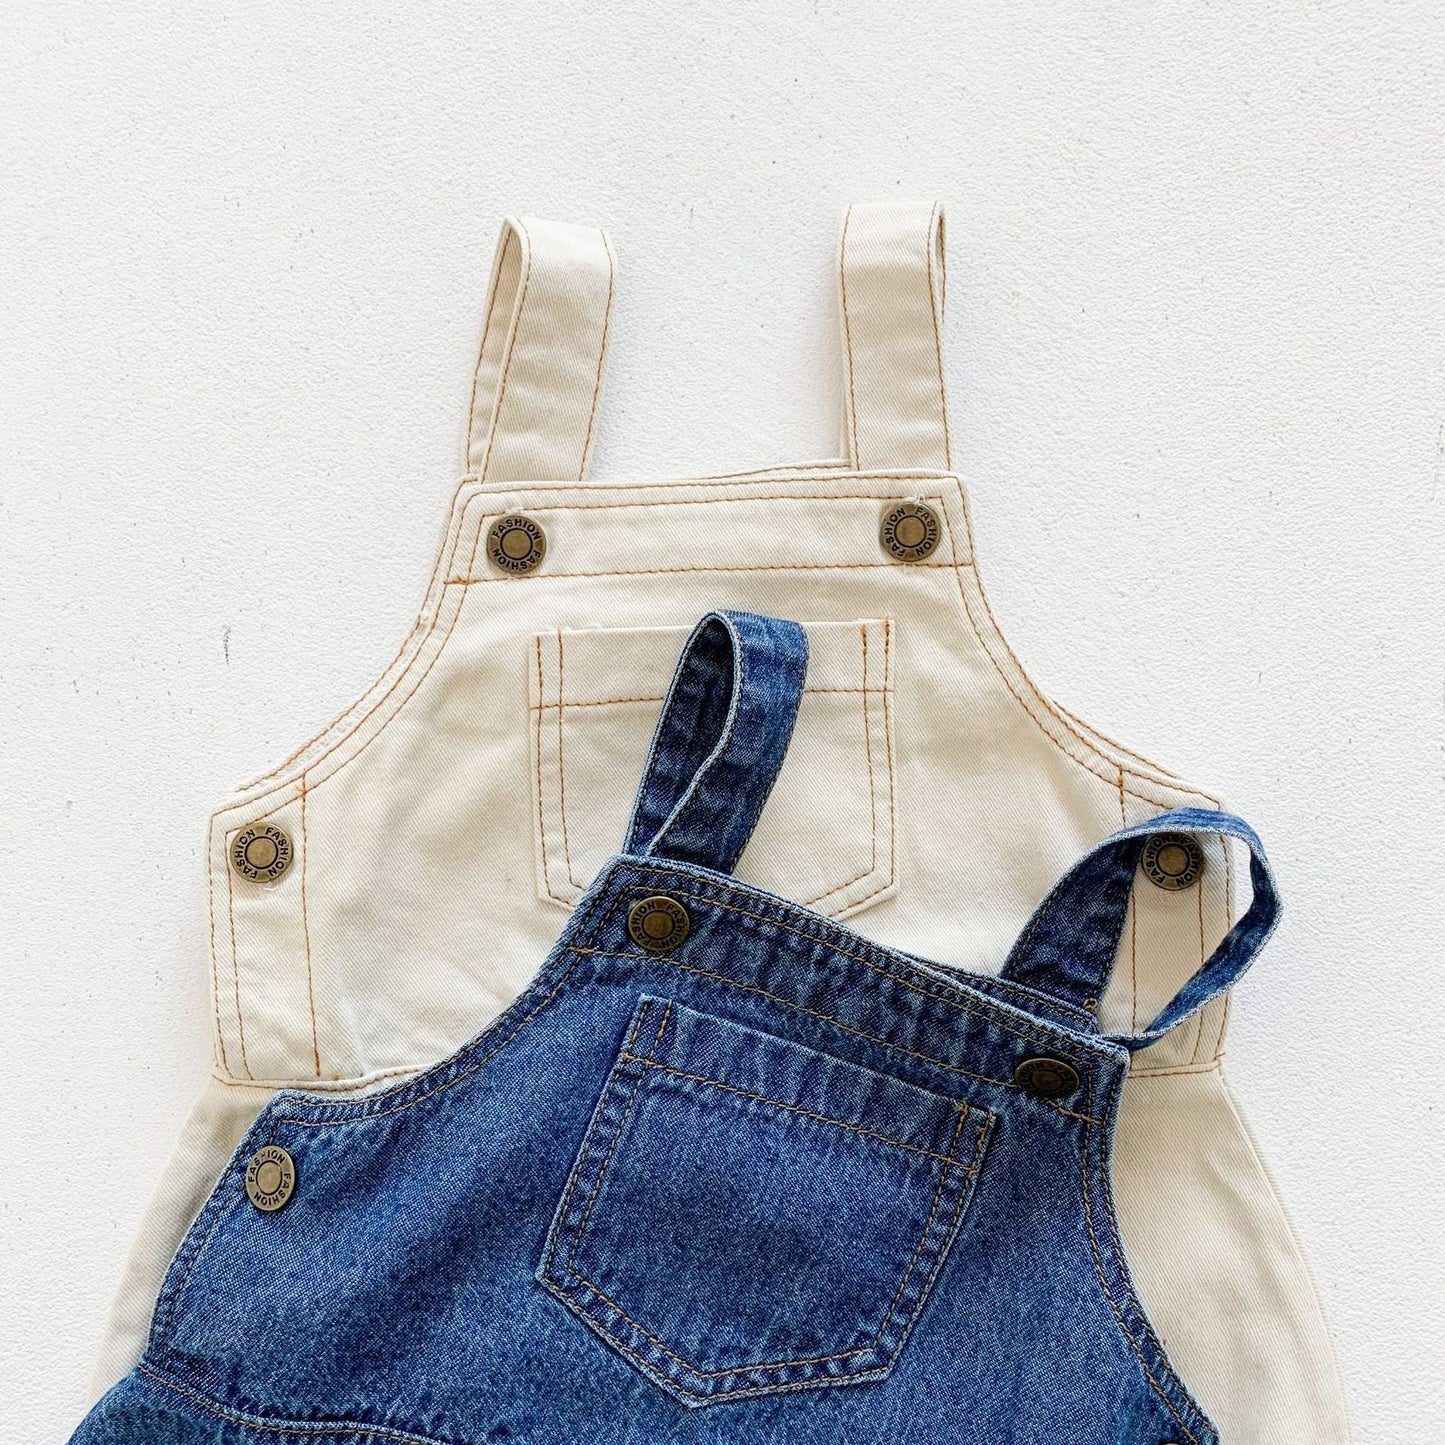 Denim Baby Clothing - Stylish and Comfortable Overalls and T-Shirts